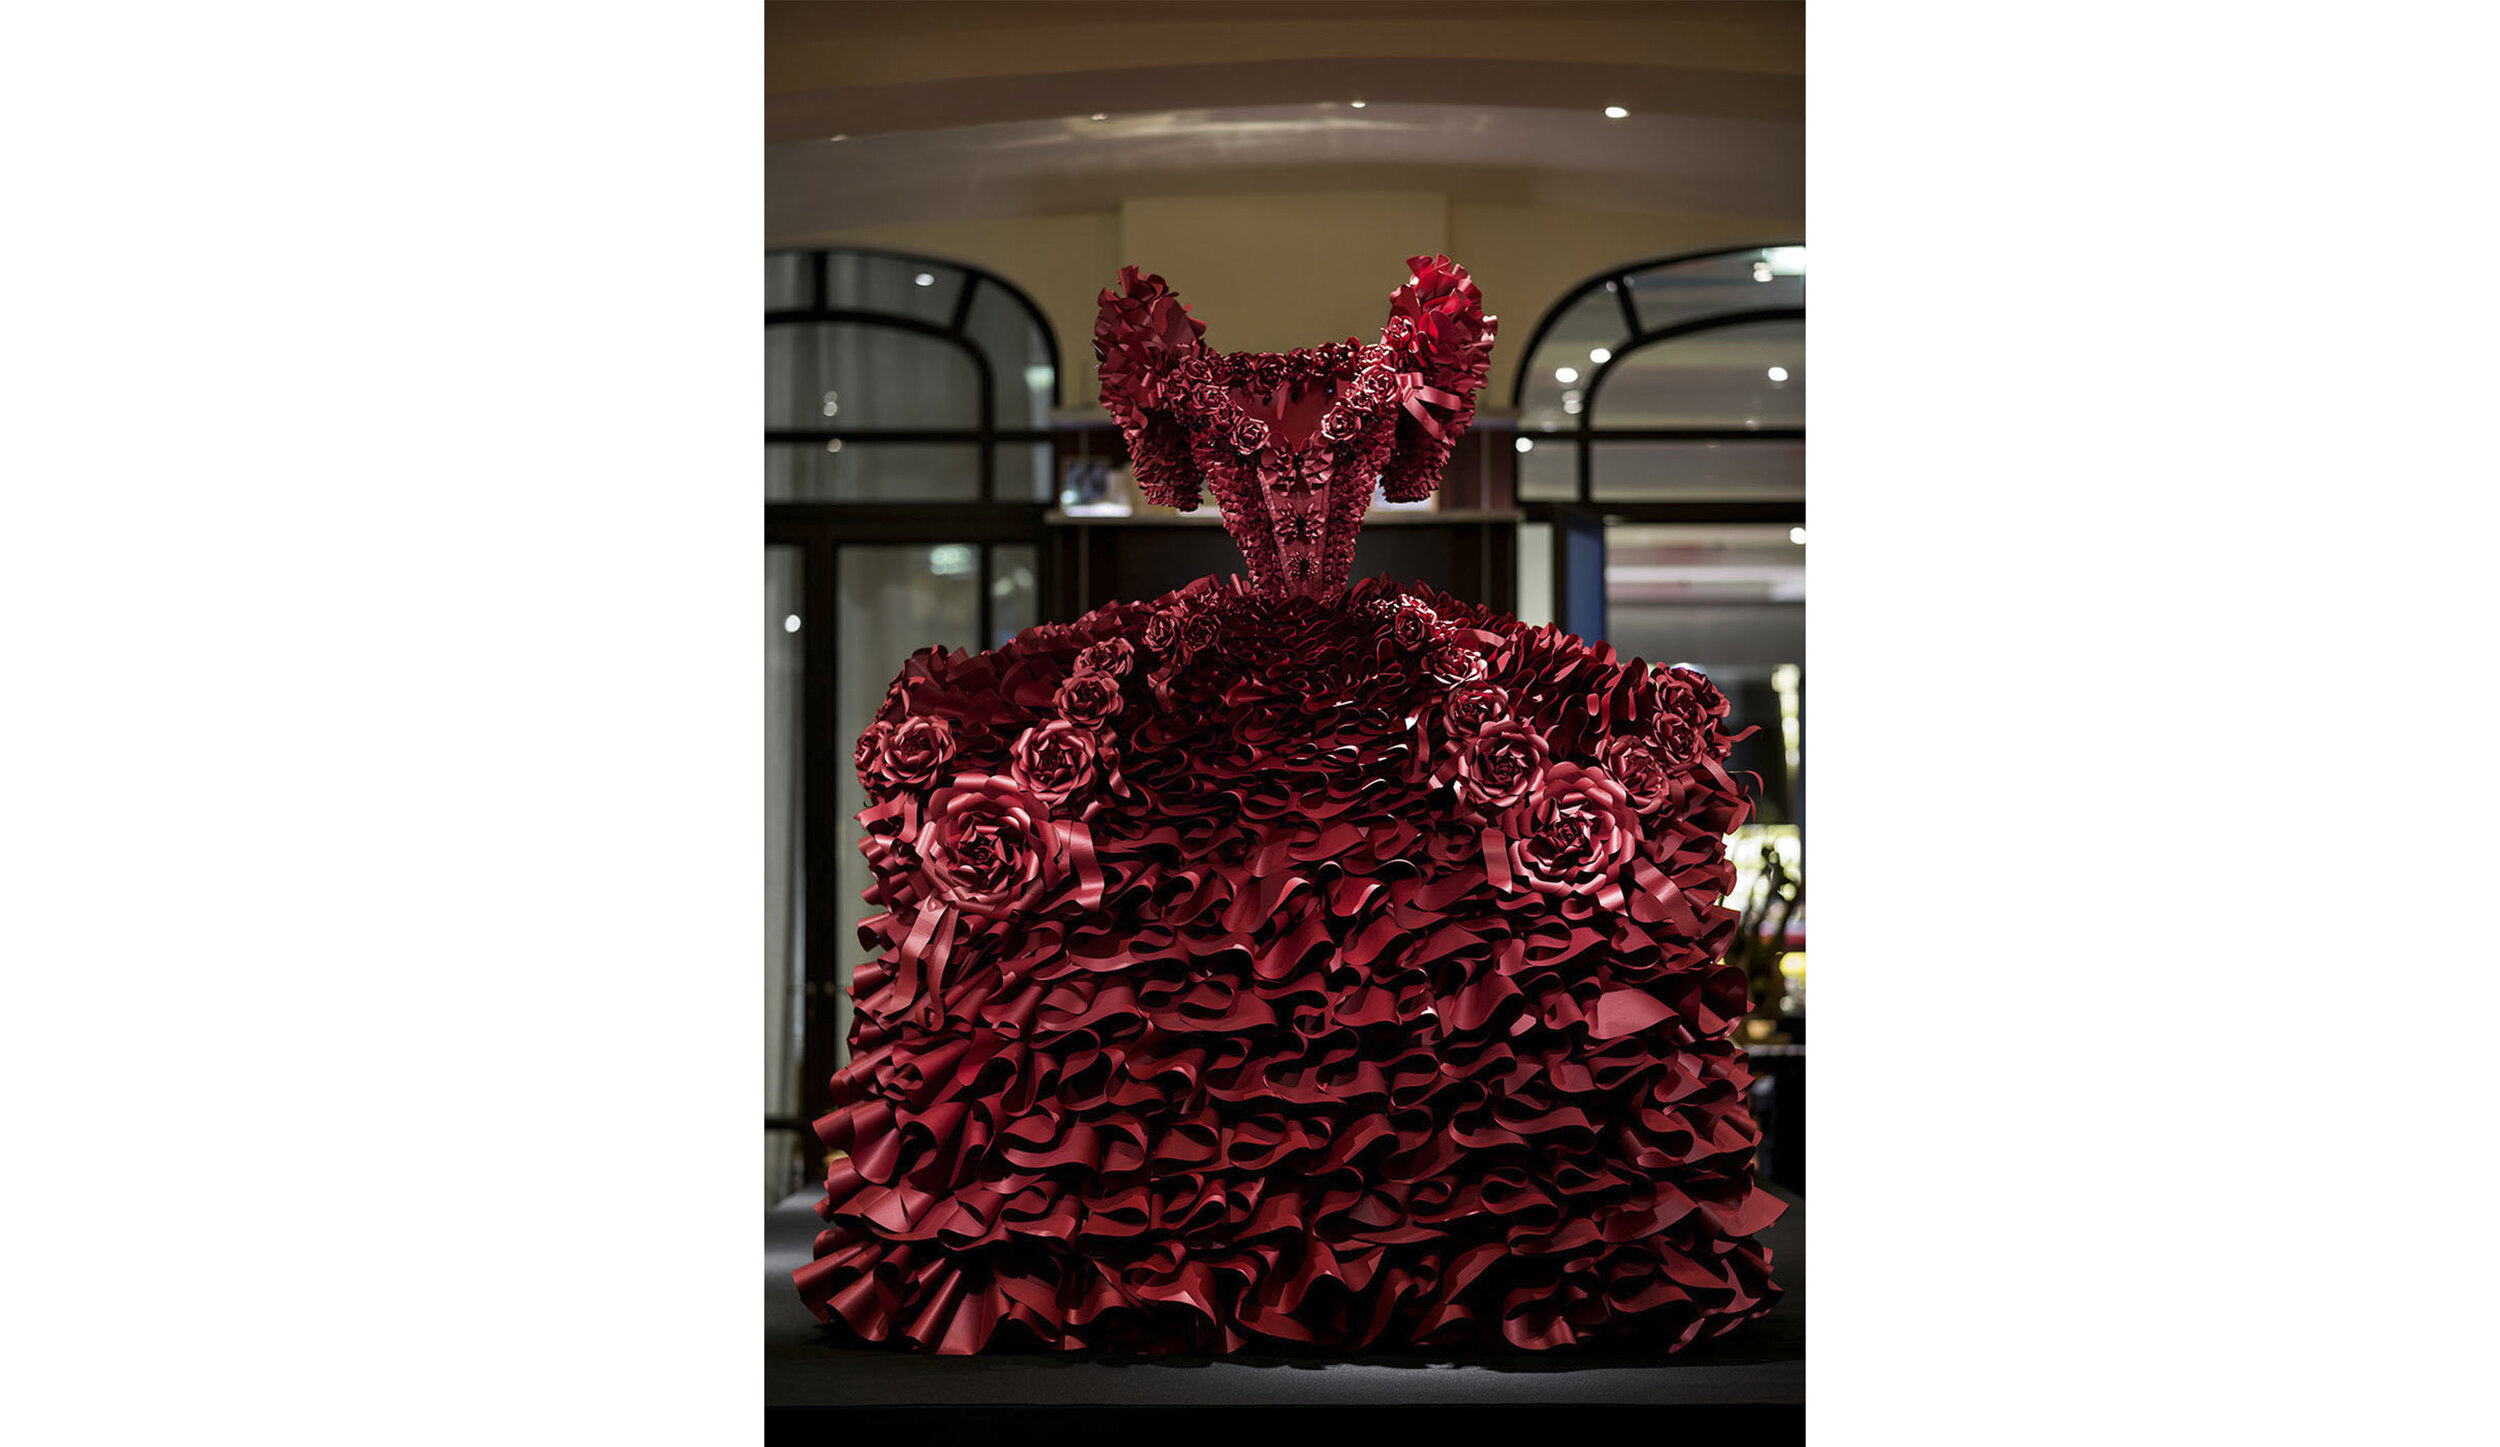 le-royal-monceau-zoebradley-couture-paperdress-red-roses-paperflowers-art-fashion-design4.jpg